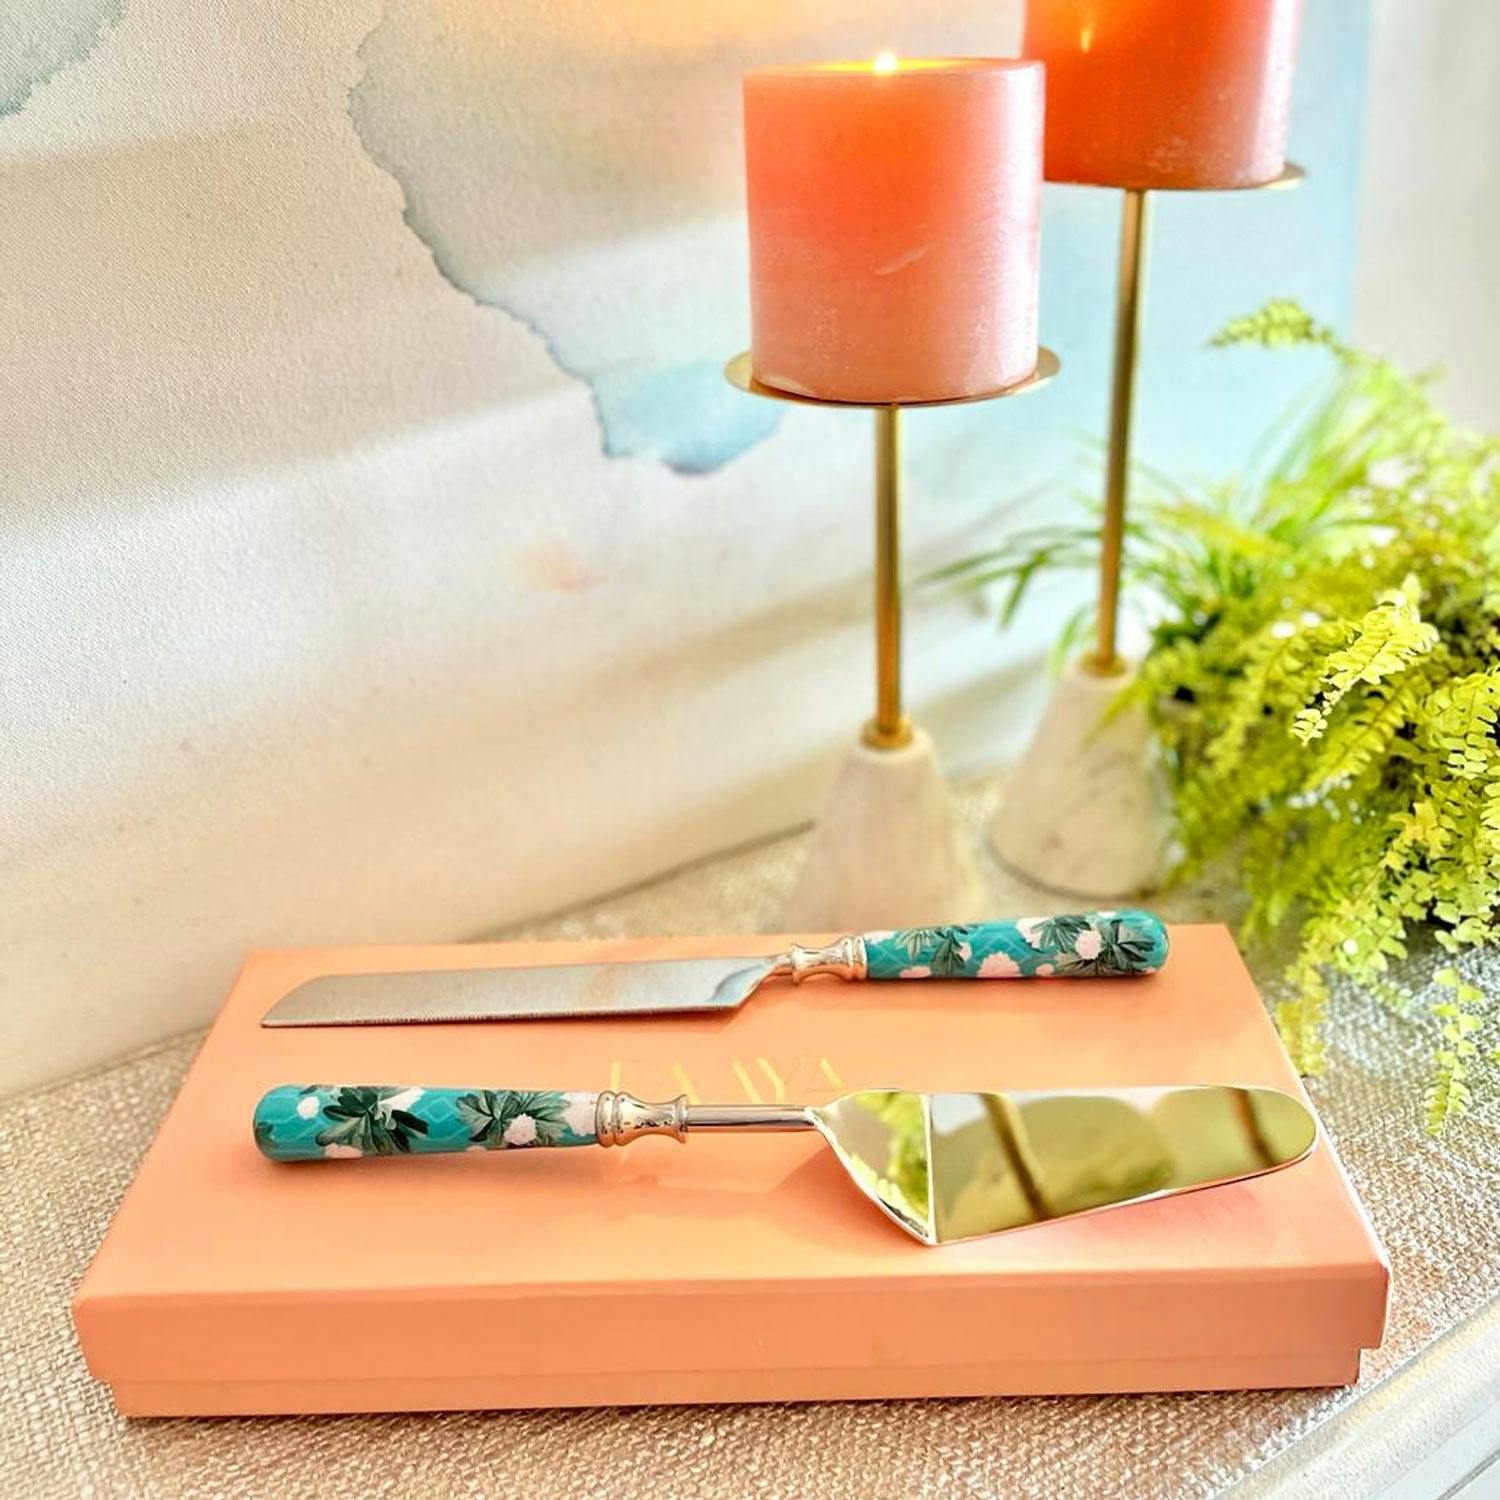 Cake Server & Knife Duo - Chilean Deco, a product by Faaya Gifting